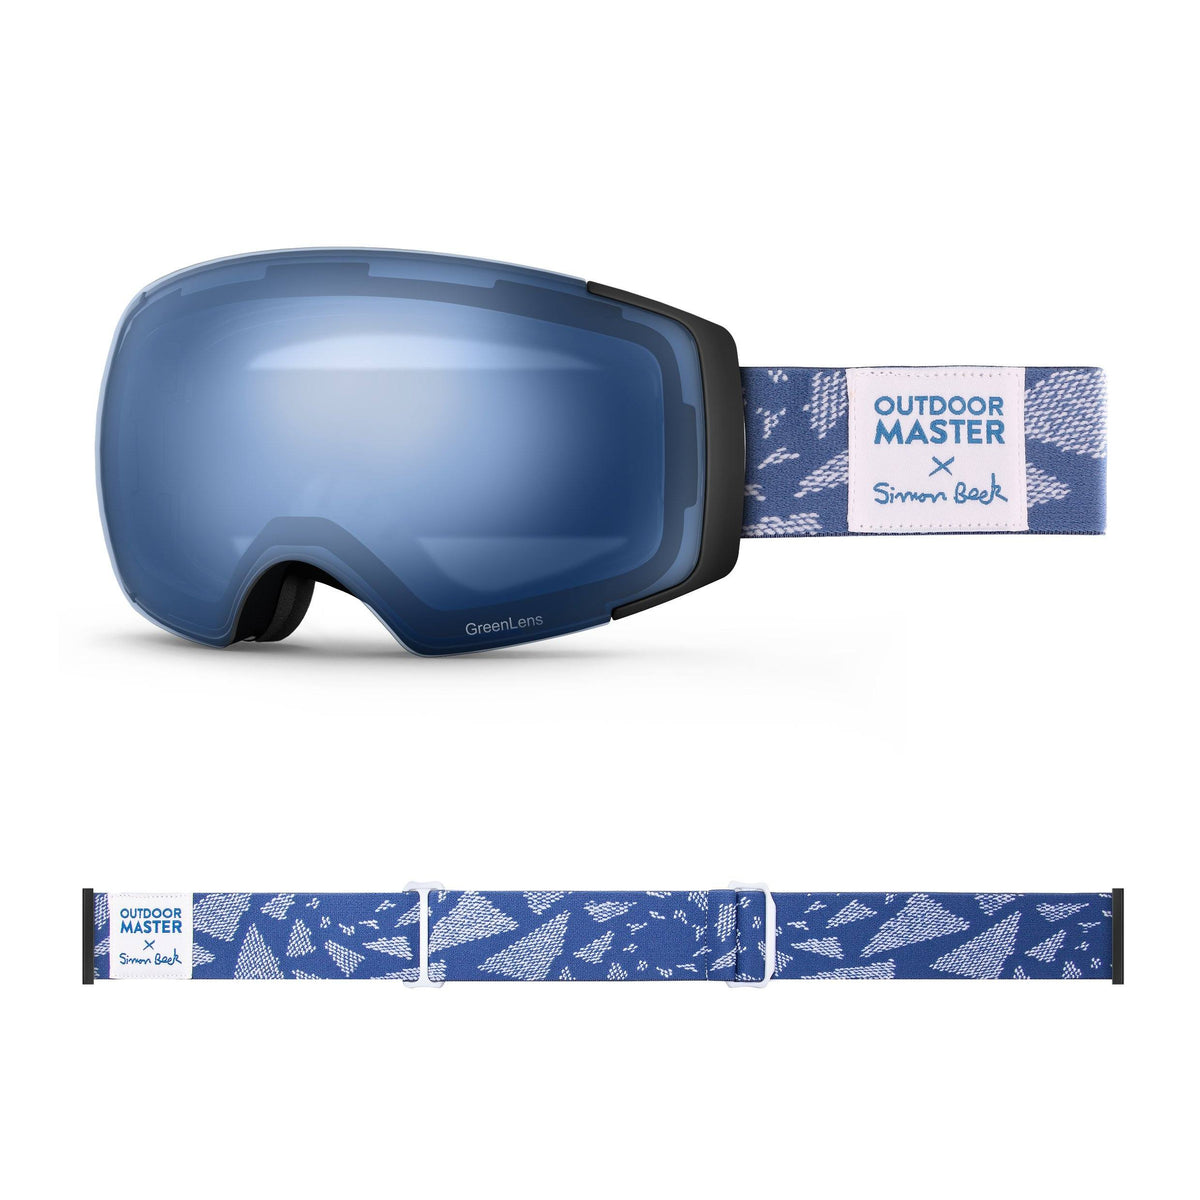 OutdoorMaster x Simon Beck Ski Goggles Pro Series - Snowshoeing Art Limited Edition OutdoorMaster GreenLens VLT 60% TAC Blue Polarized Flying Triangles